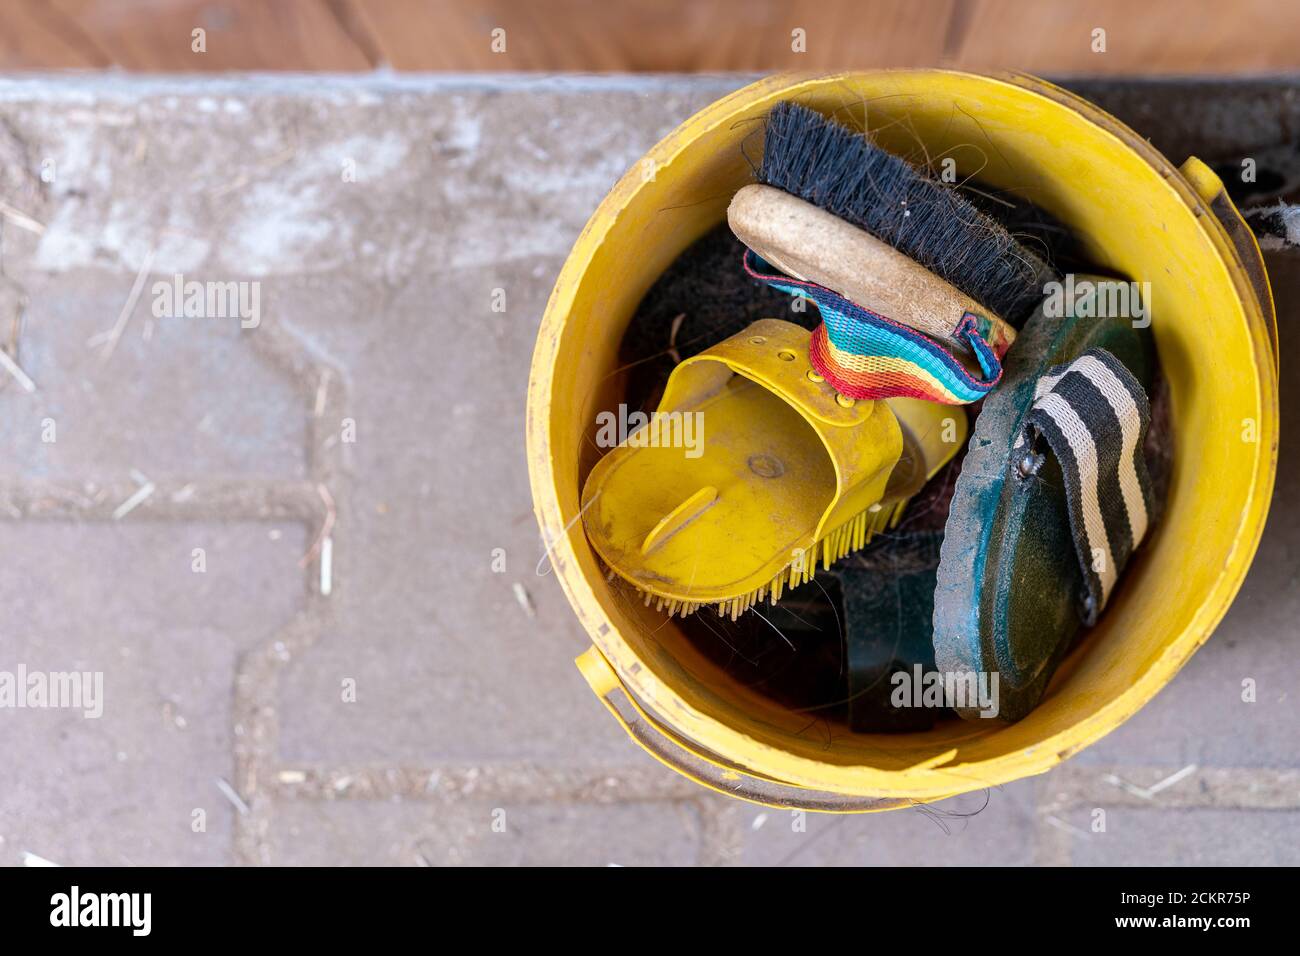 Bucket full of horse brushes. Curry comb, dandy brush, comb and body brush. Grooming kit for horses and ponies at the stable. Horse cleaning concept. Stock Photo